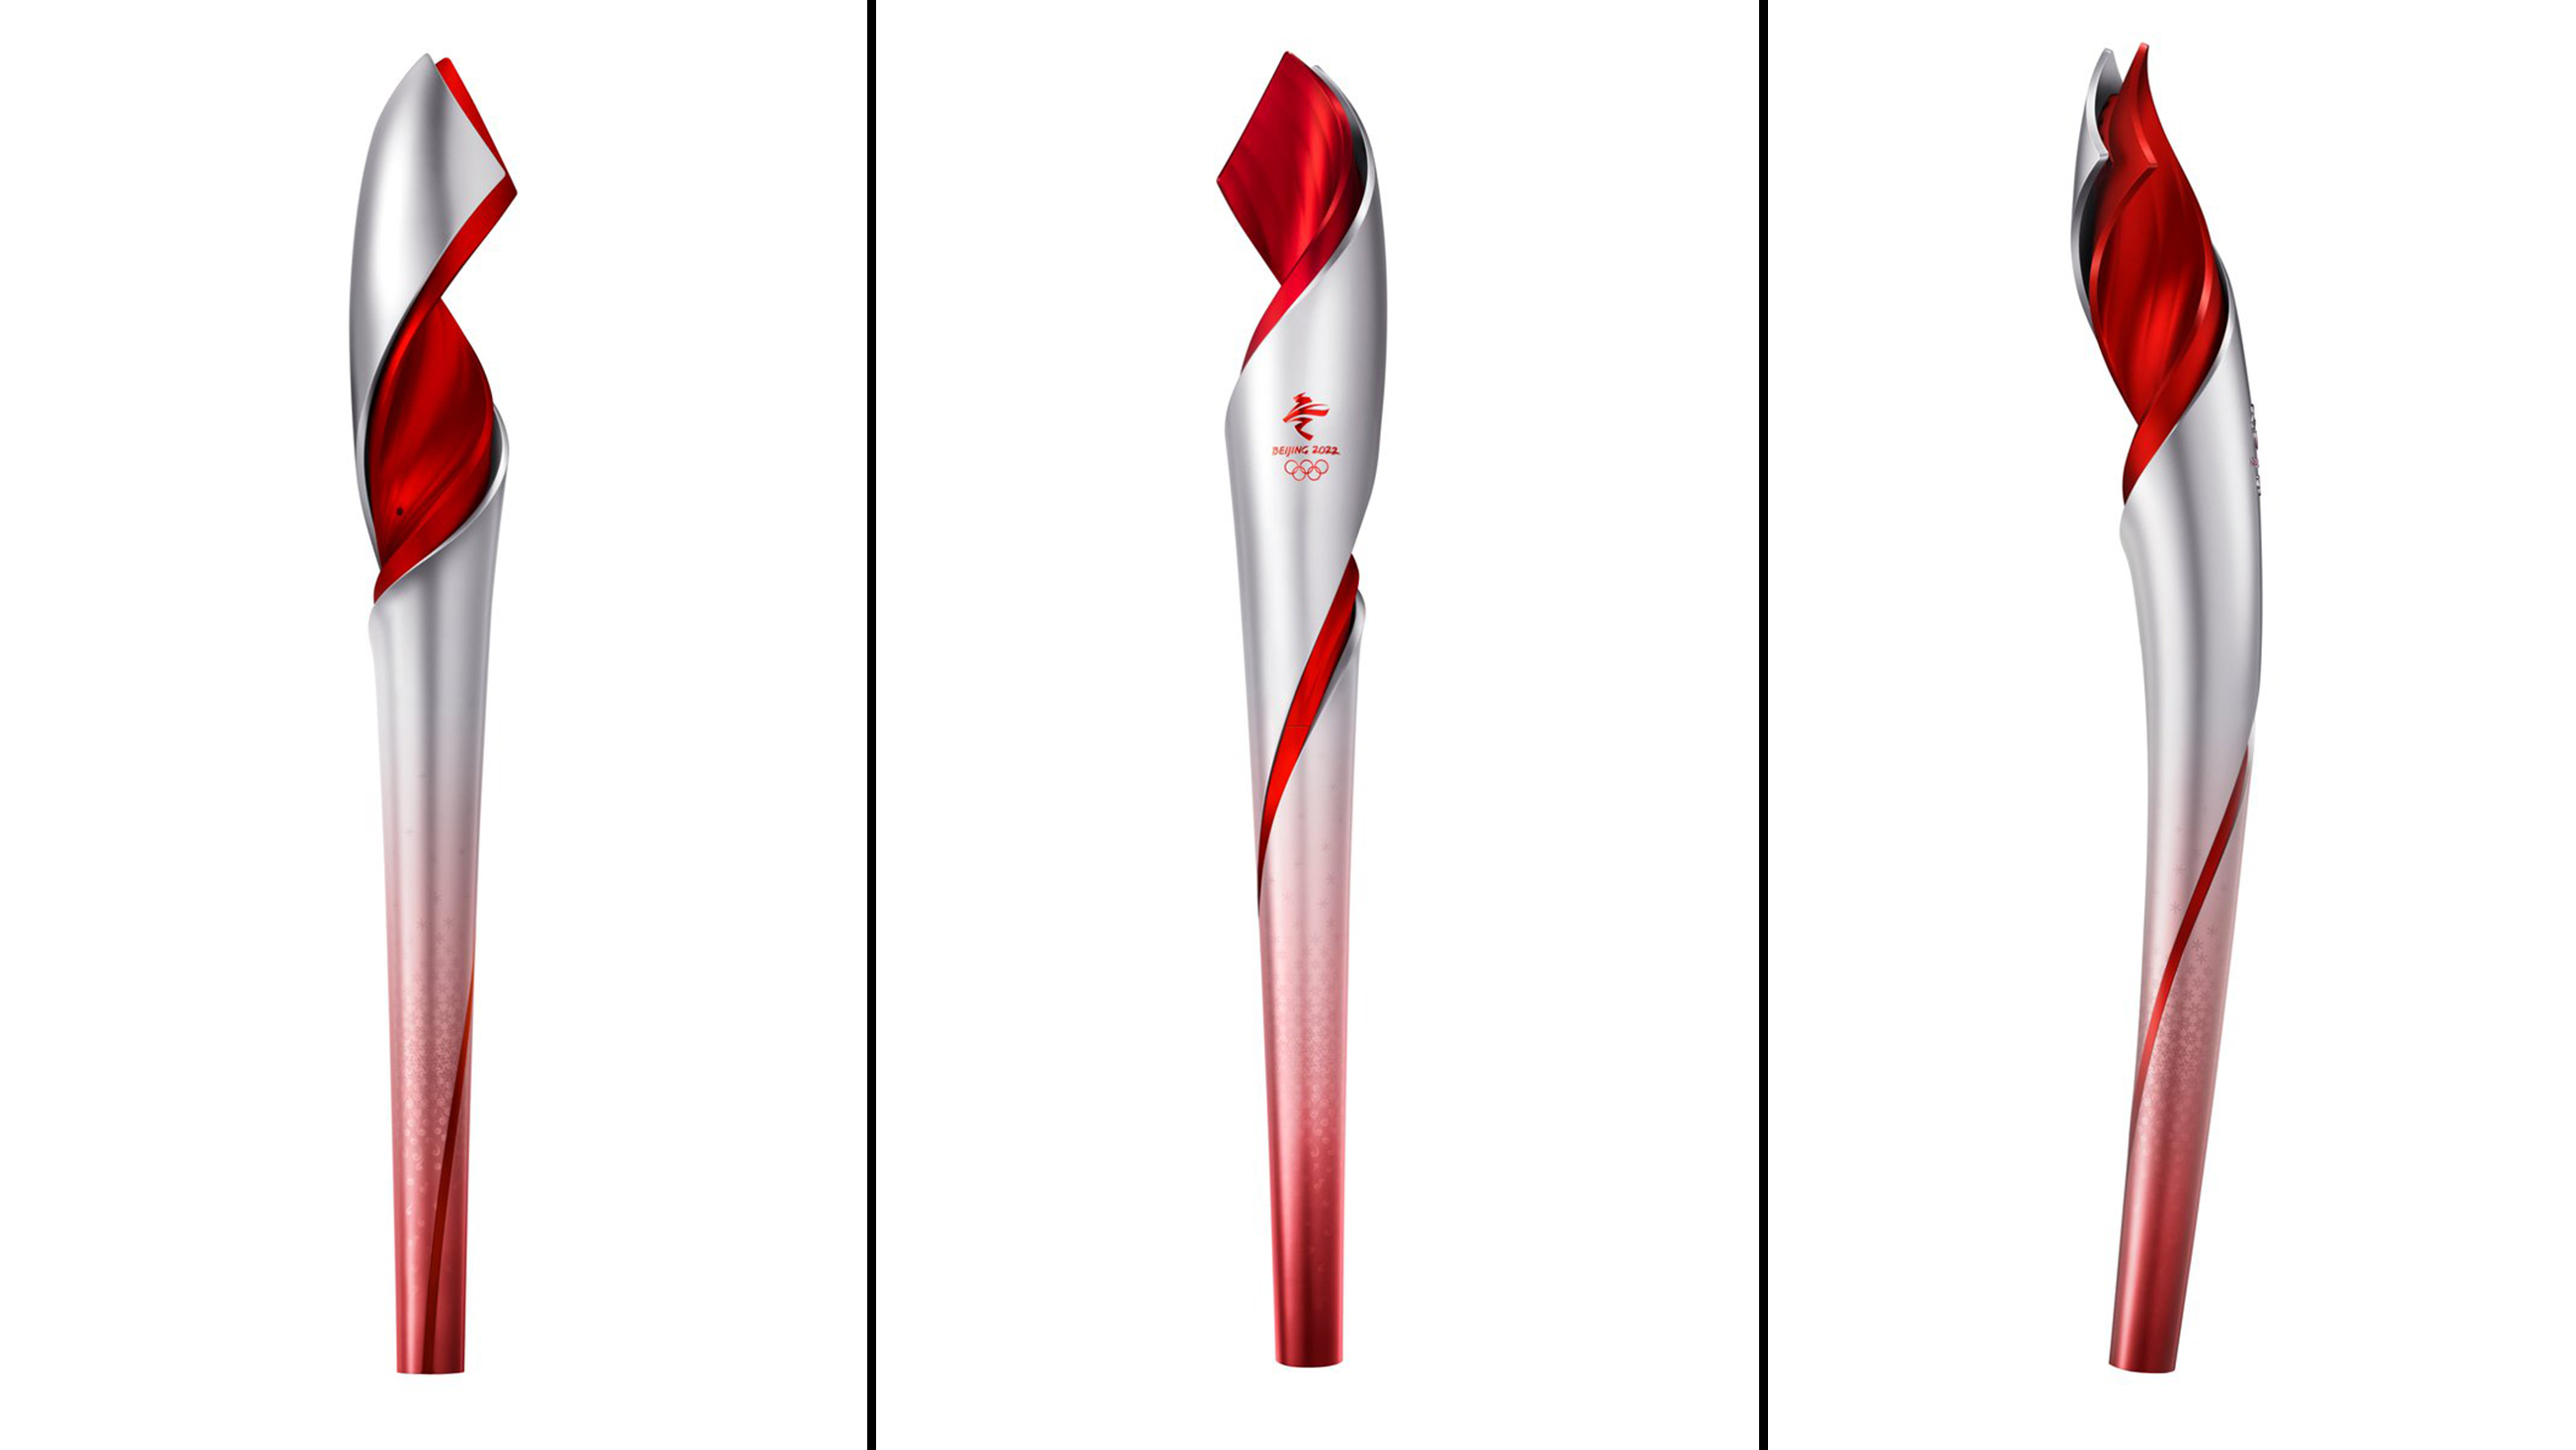 Three angles of the Beijing 2022 Olympic torch